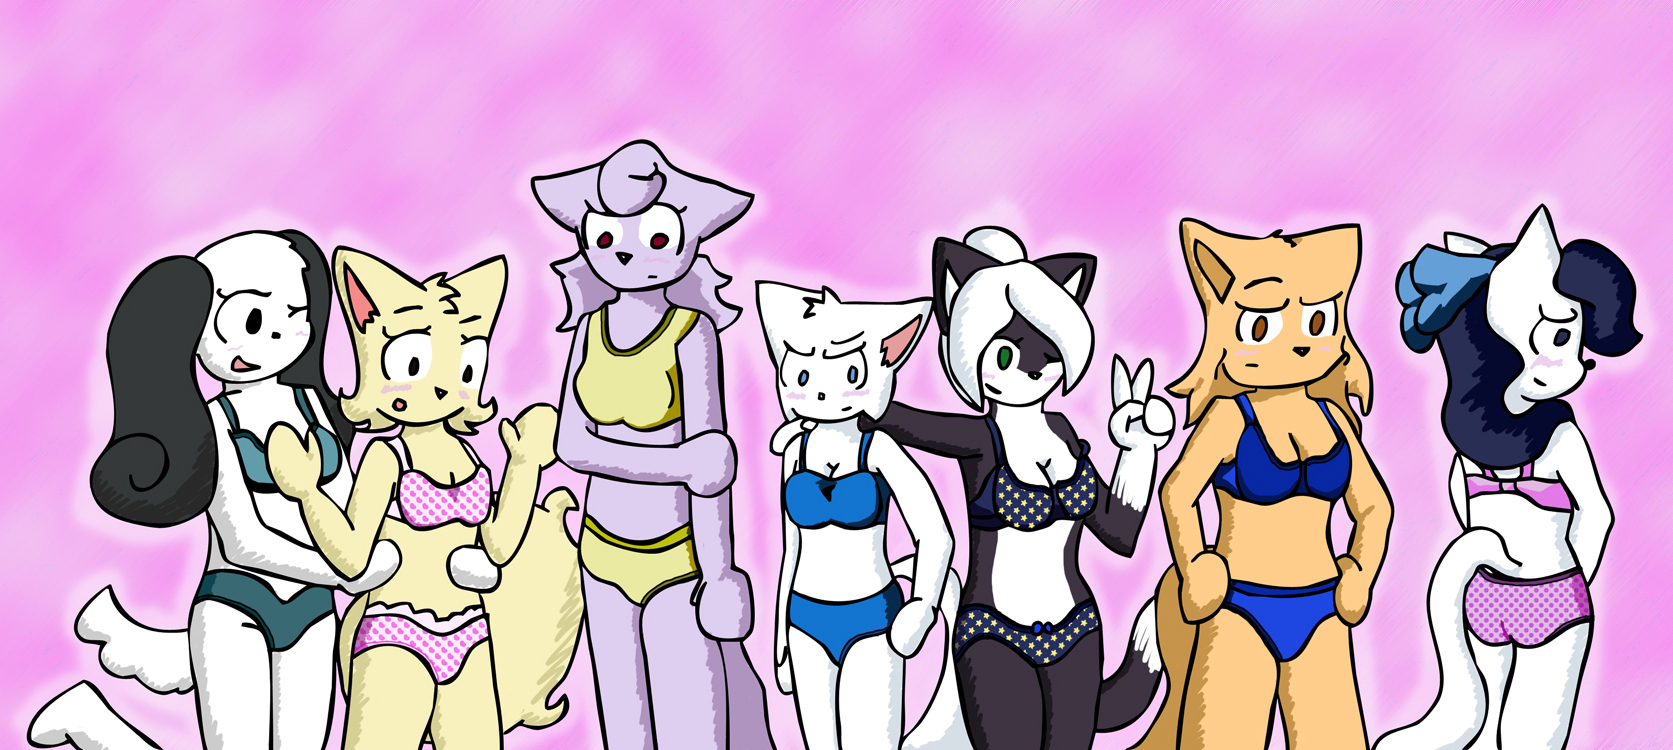 Candybooru image #4305, tagged with Daisy Jasmine Jessica Lucy Rachel Sandy SpaceMouse_(Artist) Sue